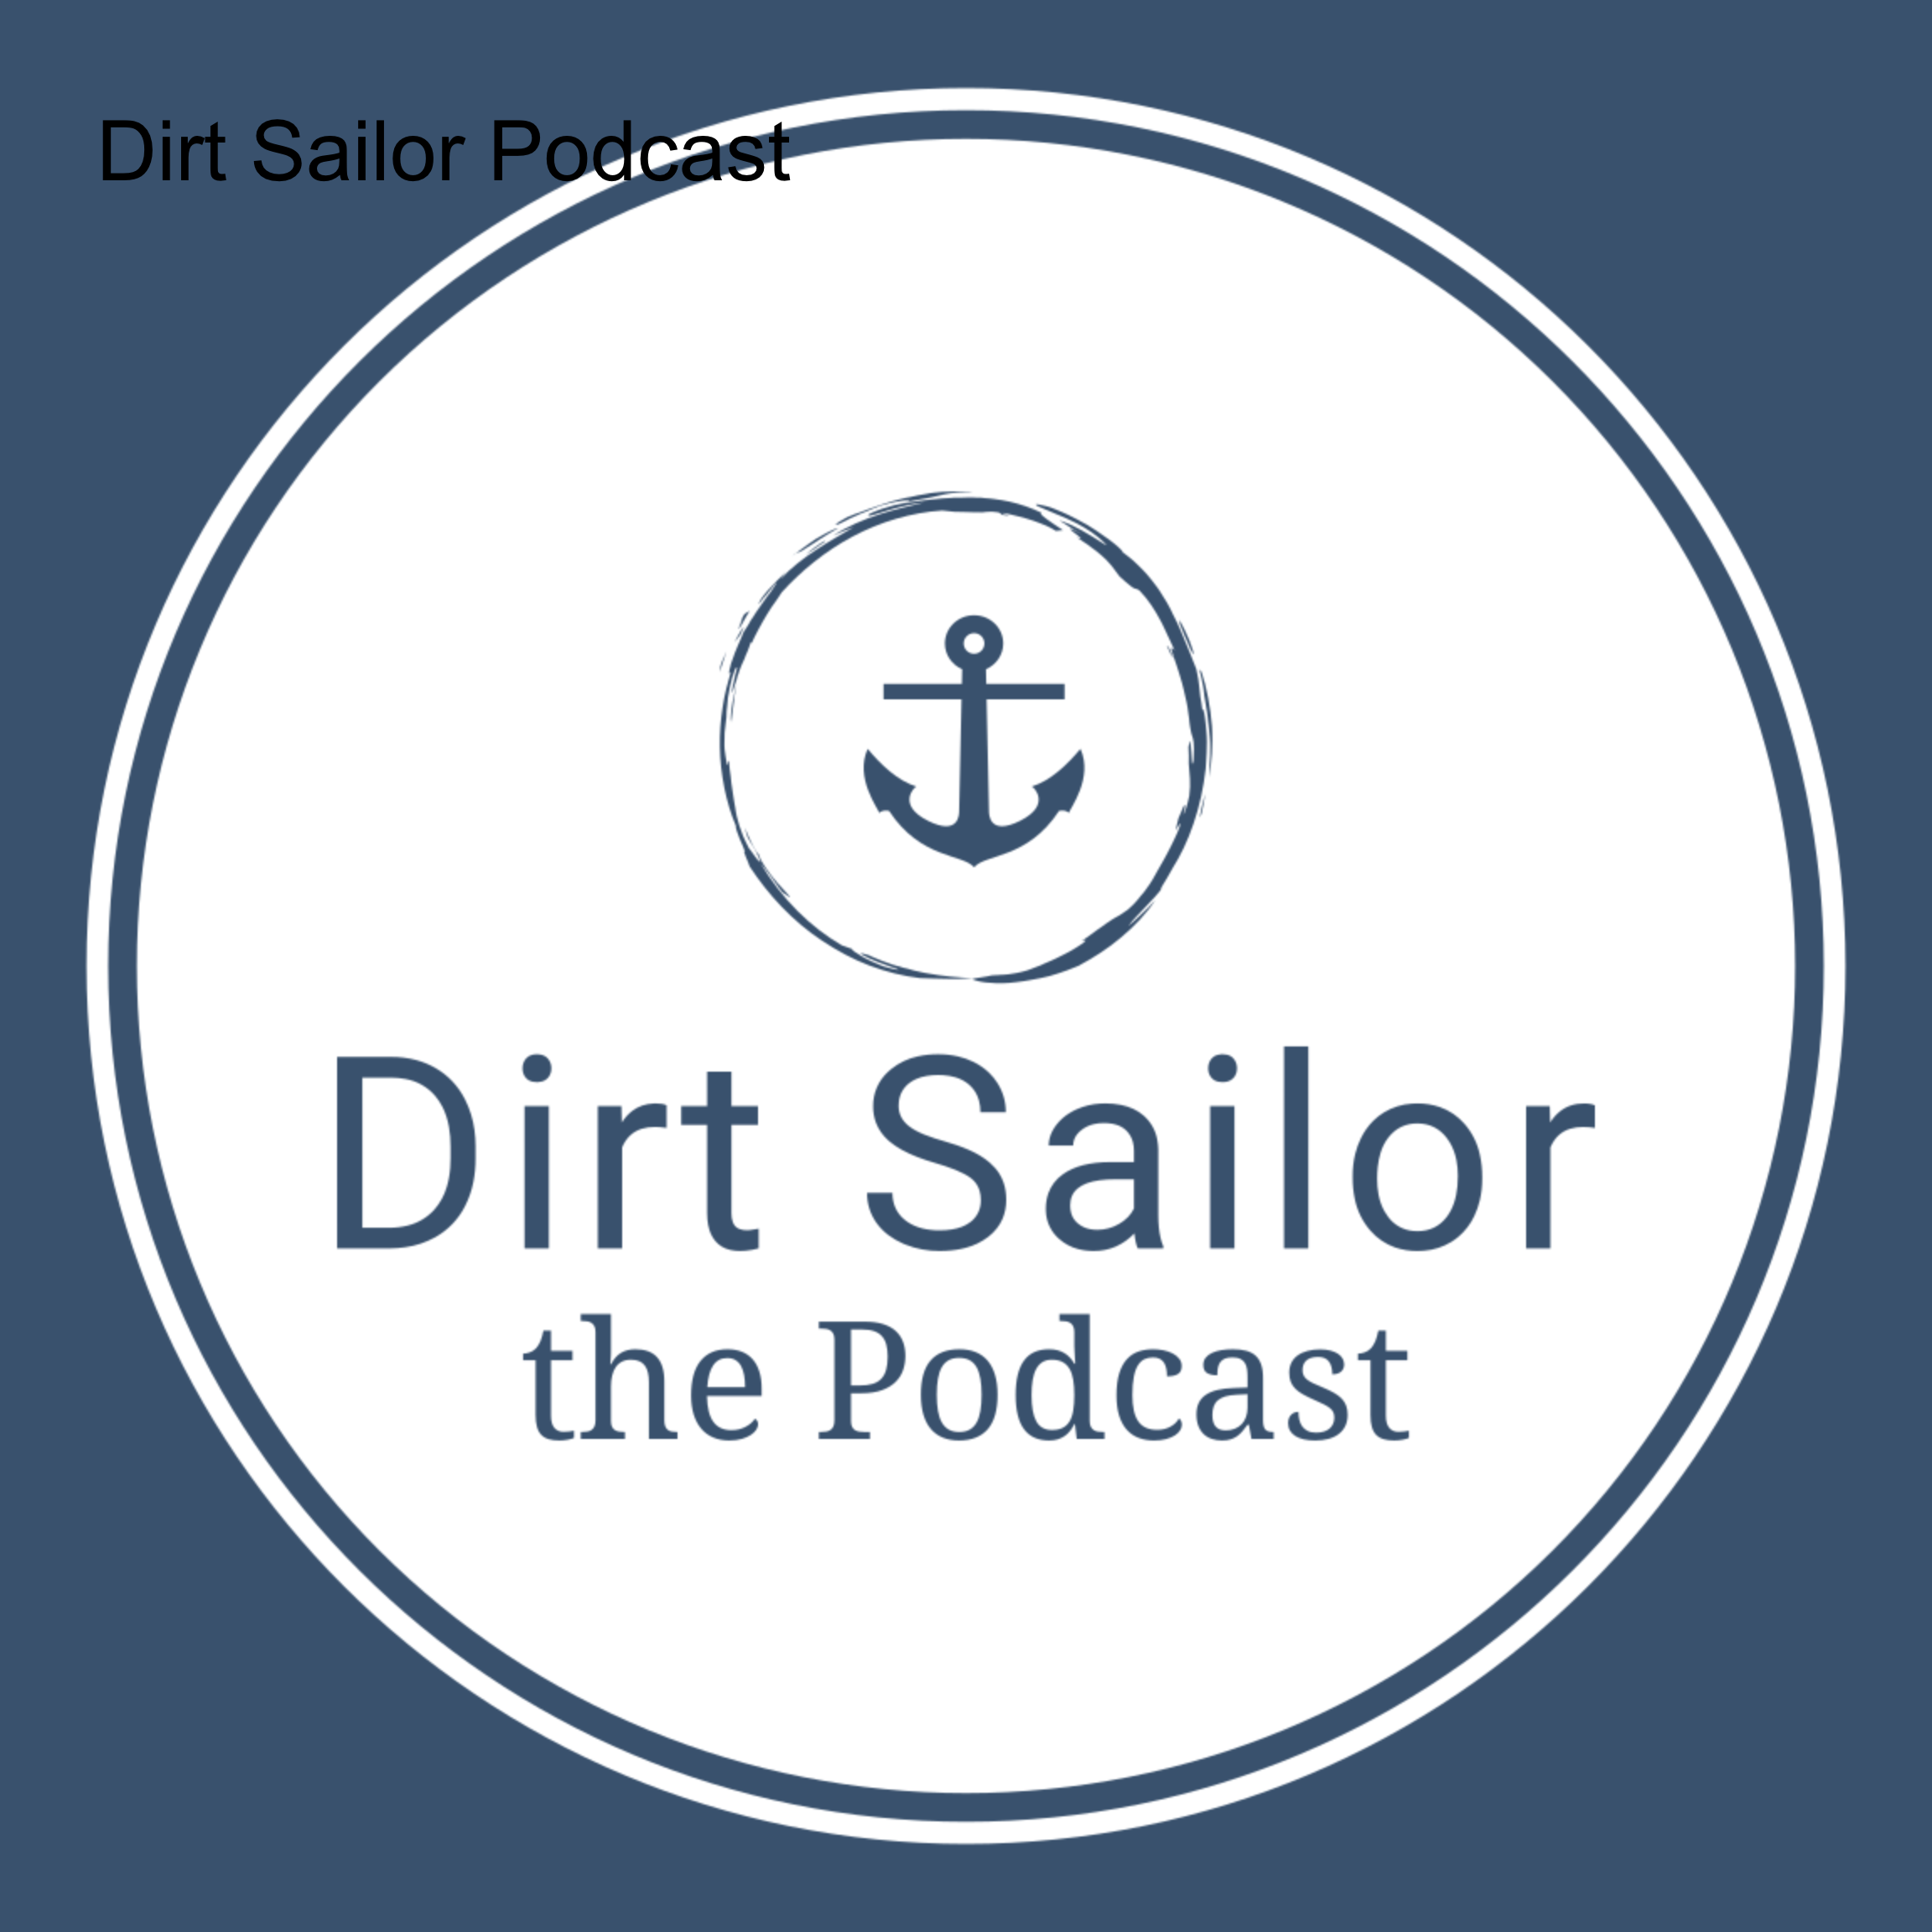 Dirt Sailor, the Podcast